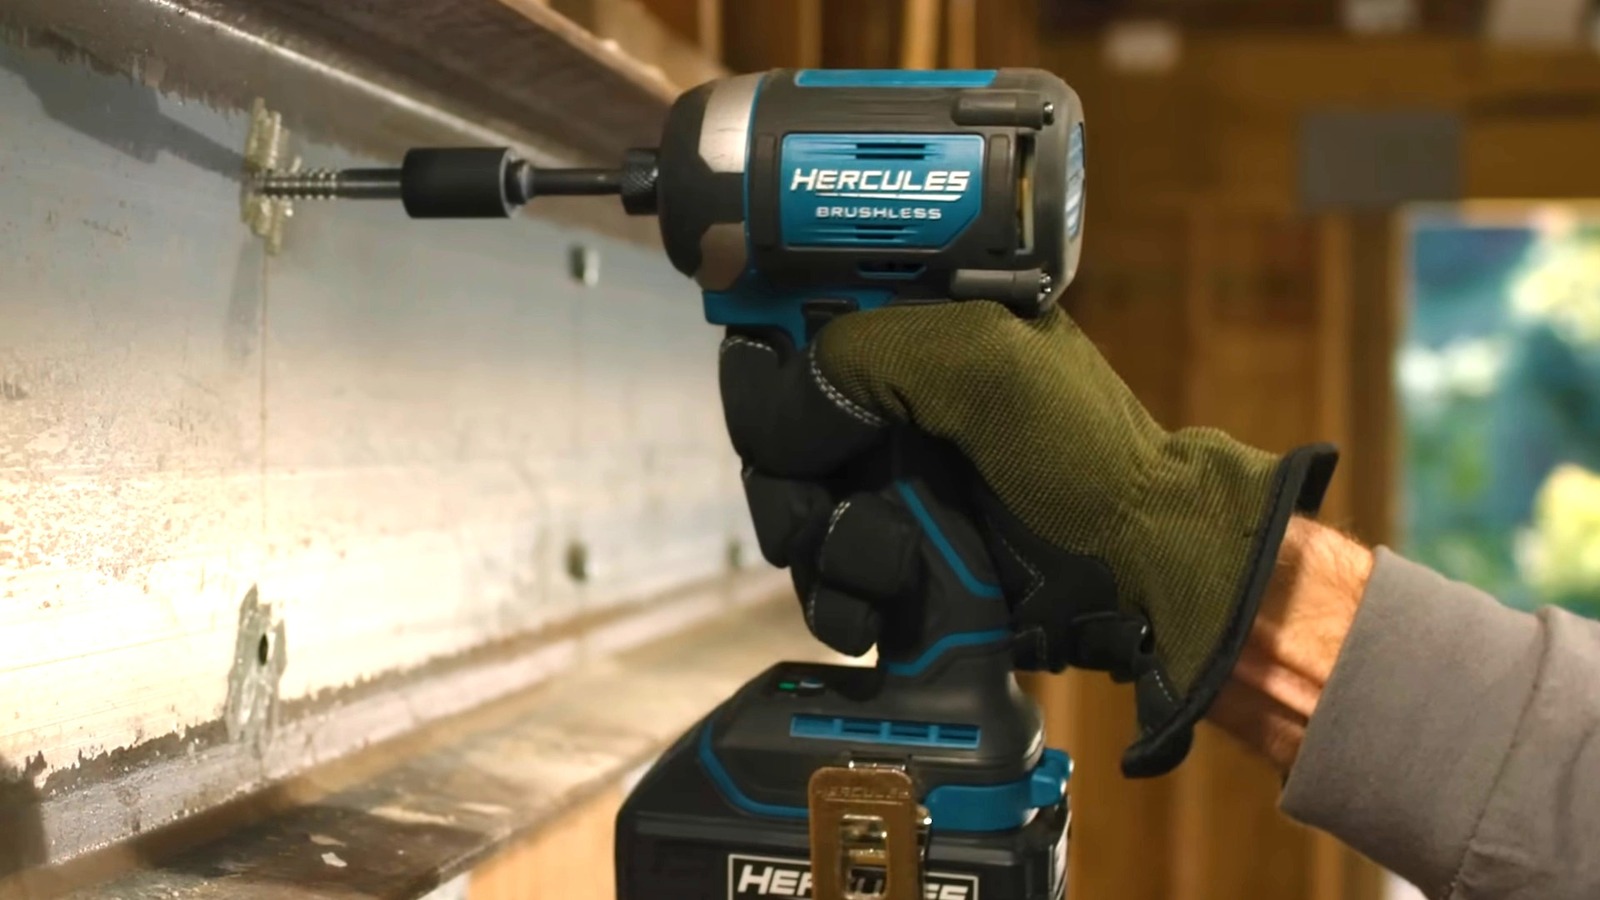 Are Hercules Power Tools From Harbor Freight Any Good?